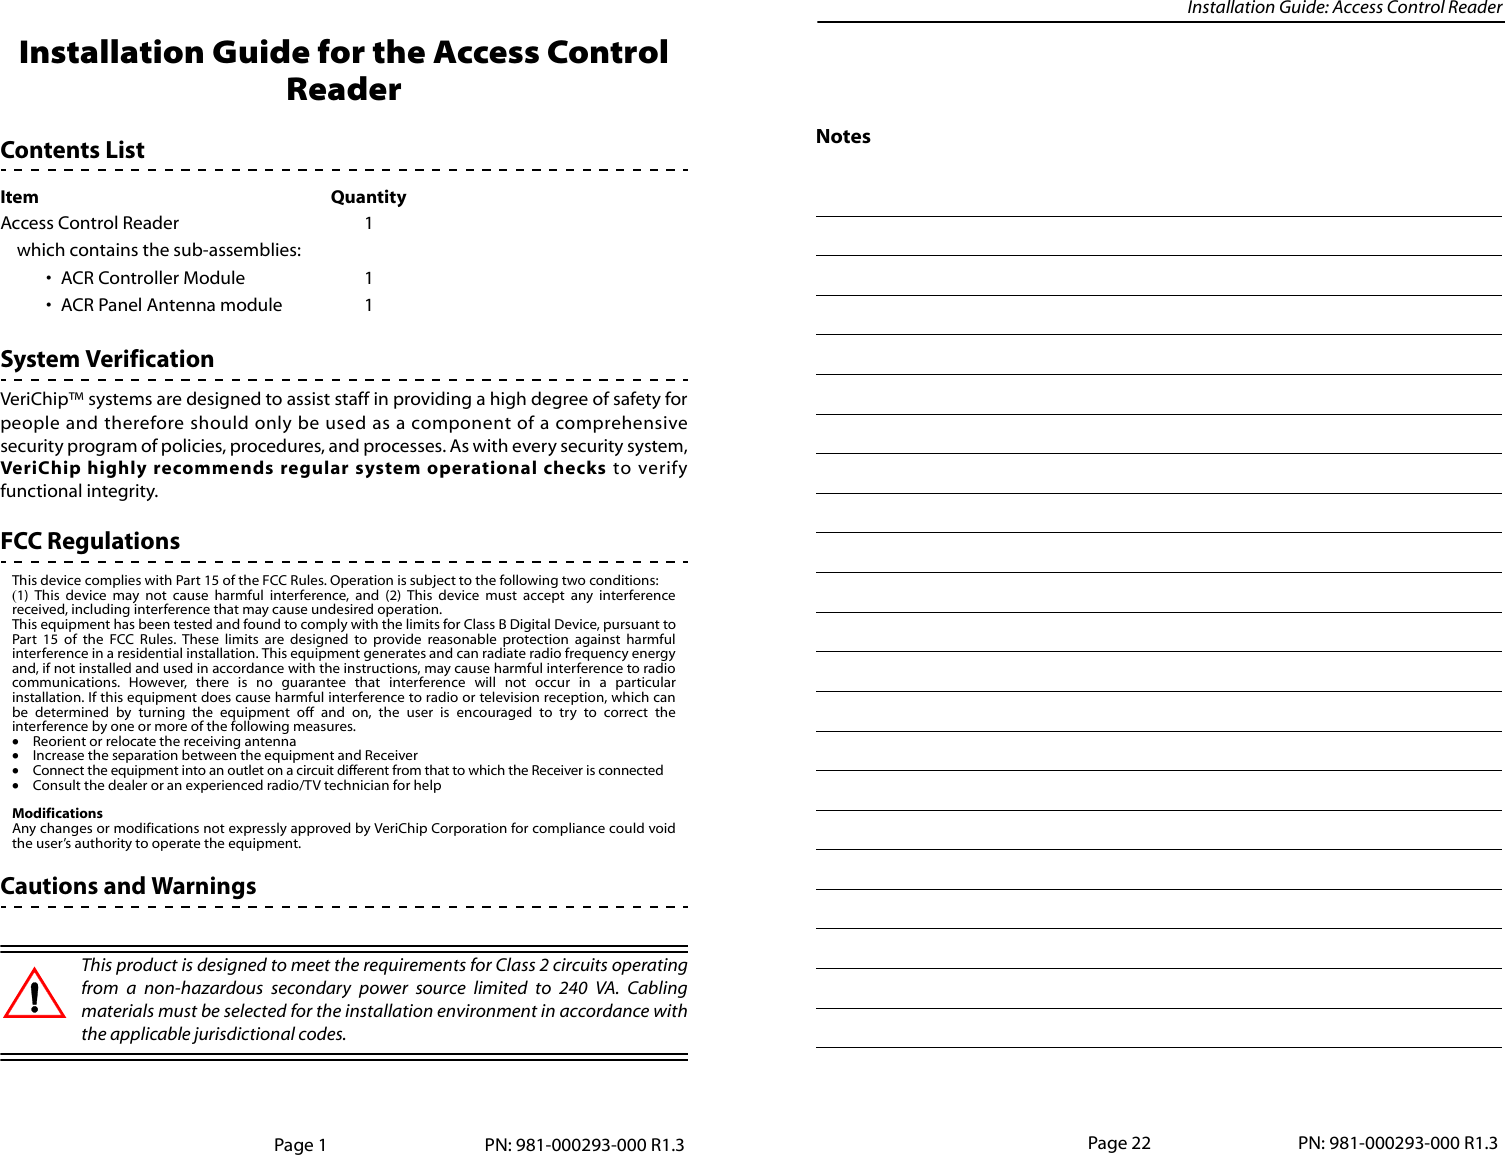 Installation Guide: Access Control ReaderInstallation Guide for the Access Control ReaderContents ListSystem VerificationVeriChip™ systems are designed to assist staff in providing a high degree of safety forpeople and therefore should only be used as a component of a comprehensivesecurity program of policies, procedures, and processes. As with every security system,VeriChip highly recommends regular system operational checks to verifyfunctional integrity. FCC RegulationsThis device complies with Part 15 of the FCC Rules. Operation is subject to the following two conditions:(1) This device may not cause harmful interference, and (2) This device must accept any interferencereceived, including interference that may cause undesired operation.This equipment has been tested and found to comply with the limits for Class B Digital Device, pursuant toPart 15 of the FCC Rules. These limits are designed to provide reasonable protection against harmfulinterference in a residential installation. This equipment generates and can radiate radio frequency energyand, if not installed and used in accordance with the instructions, may cause harmful interference to radiocommunications. However, there is no guarantee that interference will not occur in a particularinstallation. If this equipment does cause harmful interference to radio or television reception, which canbe determined by turning the equipment off and on, the user is encouraged to try to correct theinterference by one or more of the following measures.•Reorient or relocate the receiving antenna•Increase the separation between the equipment and Receiver•Connect the equipment into an outlet on a circuit different from that to which the Receiver is connected•Consult the dealer or an experienced radio/TV technician for helpModificationsAny changes or modifications not expressly approved by VeriChip Corporation for compliance could voidthe user’s authority to operate the equipment.Cautions and WarningsThis product is designed to meet the requirements for Class 2 circuits operatingfrom a non-hazardous secondary power source limited to 240 VA. Cablingmaterials must be selected for the installation environment in accordance withthe applicable jurisdictional codes. Item QuantityAccess Control Reader  1which contains the sub-assemblies:• ACR Controller Module 1• ACR Panel Antenna module 1Page 1 PN: 981-000293-000 R1.3NotesPage 22 PN: 981-000293-000 R1.3